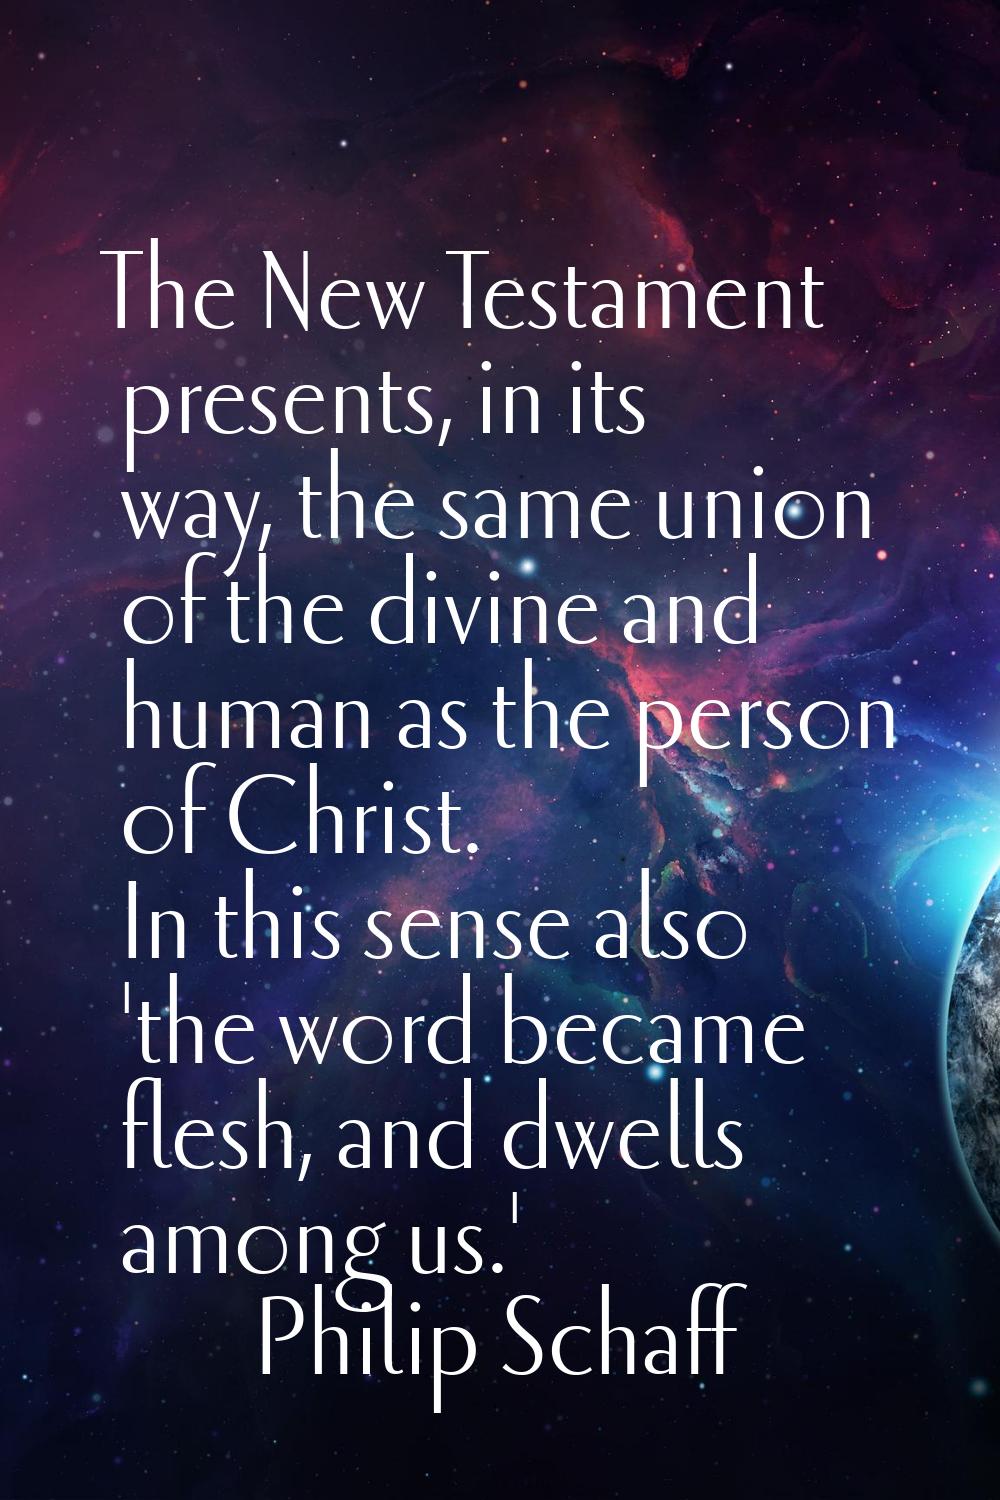 The New Testament presents, in its way, the same union of the divine and human as the person of Chr